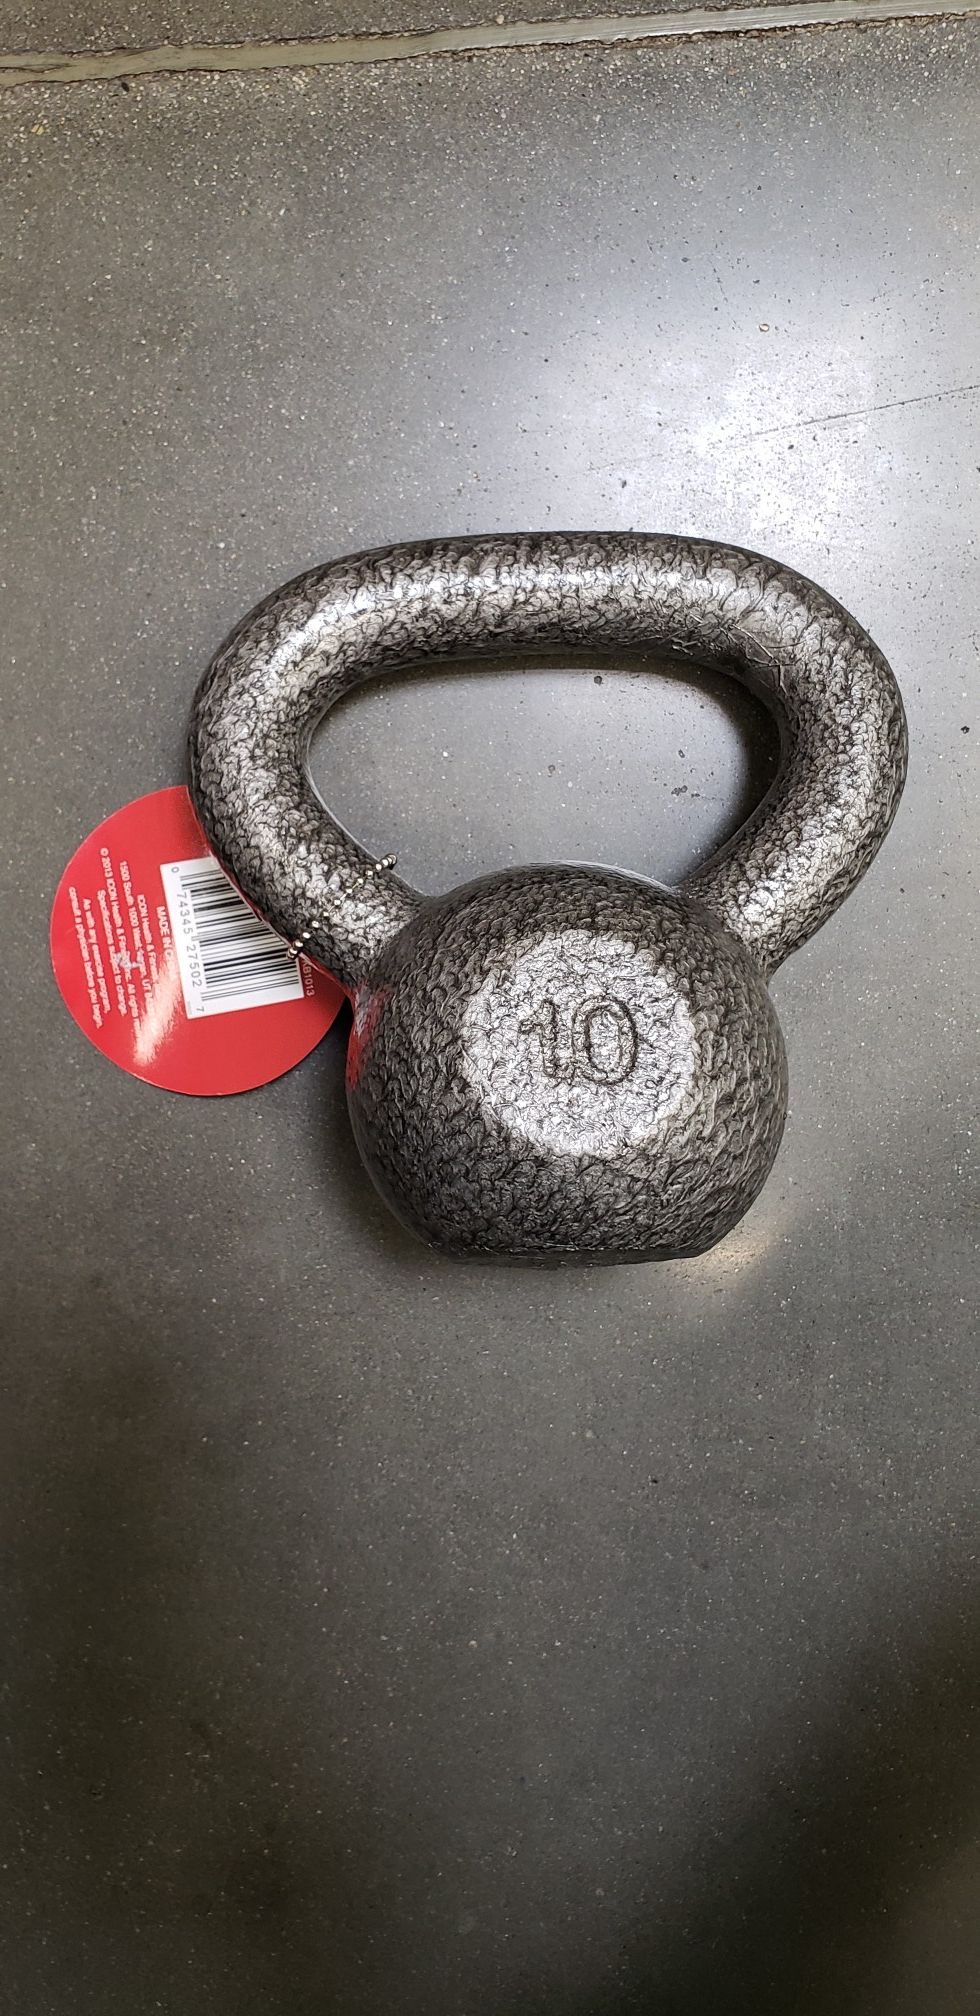 Kettlebell 10lbs Pounds Exercise Weight Brand New